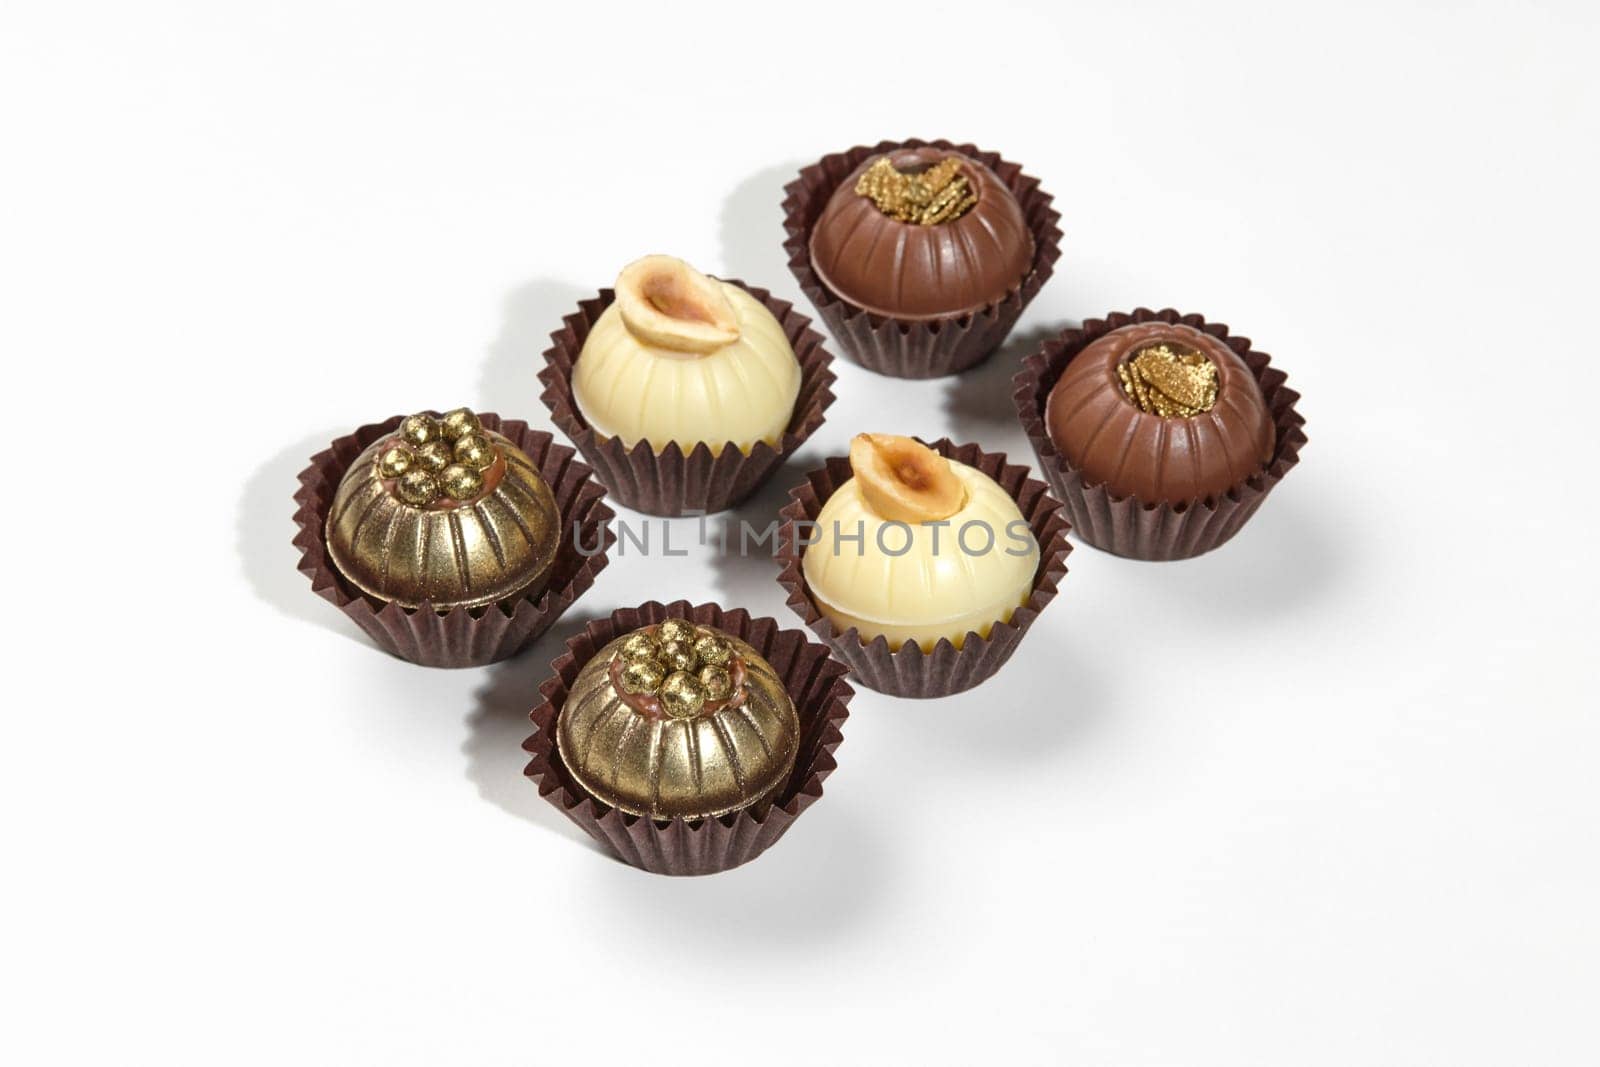 Designer exquisite chocolate candies in shape of balls decorated with hazelnuts, caramel crumbs and golden pearls, isolated on white background